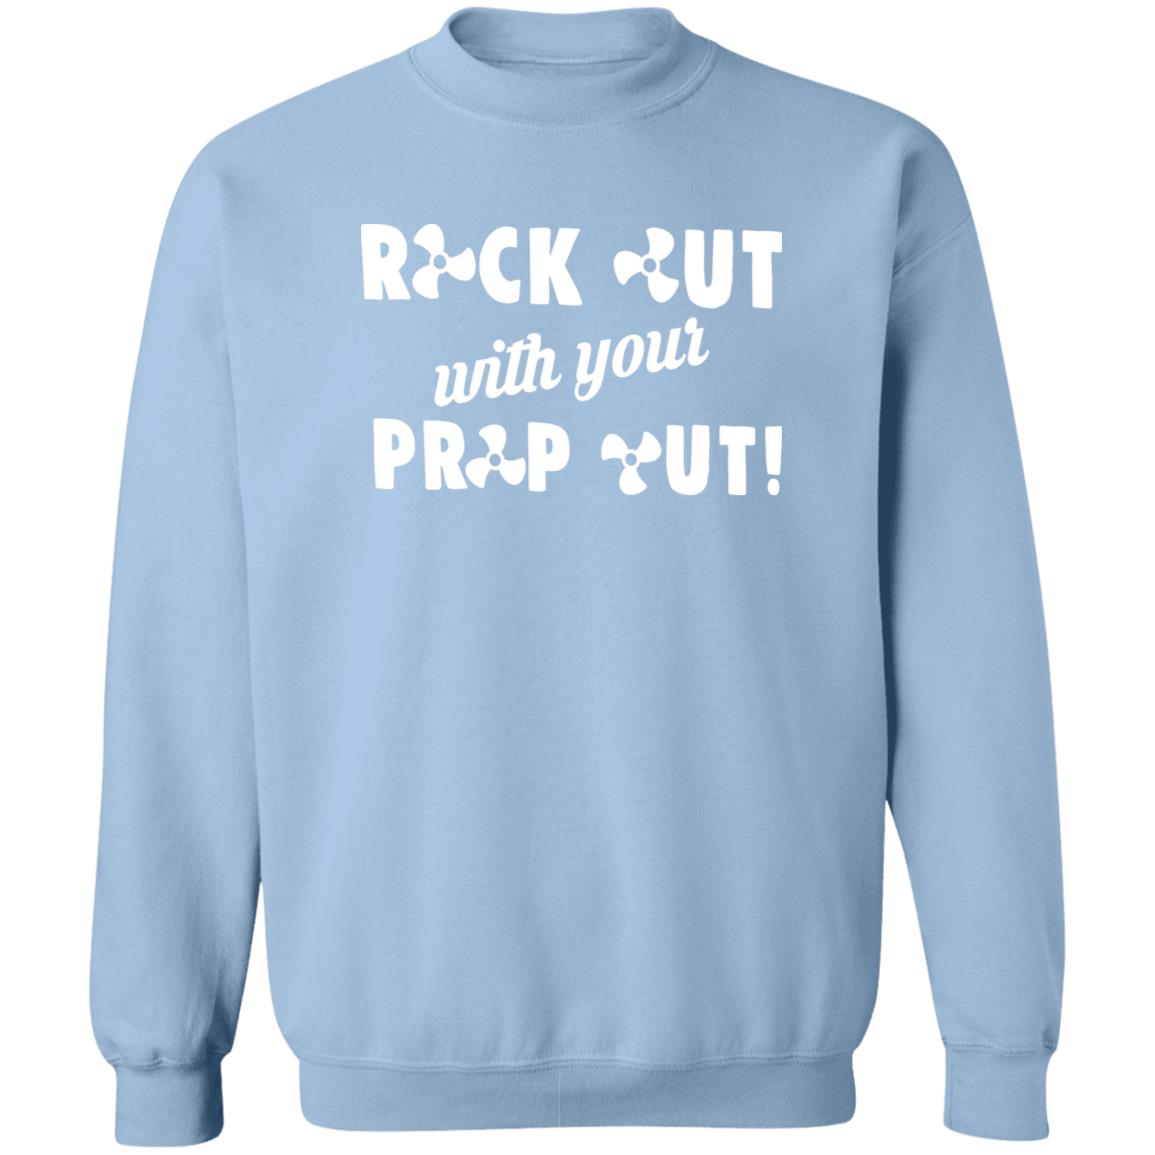 HRCL FL - Rock Out with your Prop Out - 2 Sided G180 Crewneck Pullover Sweatshirt